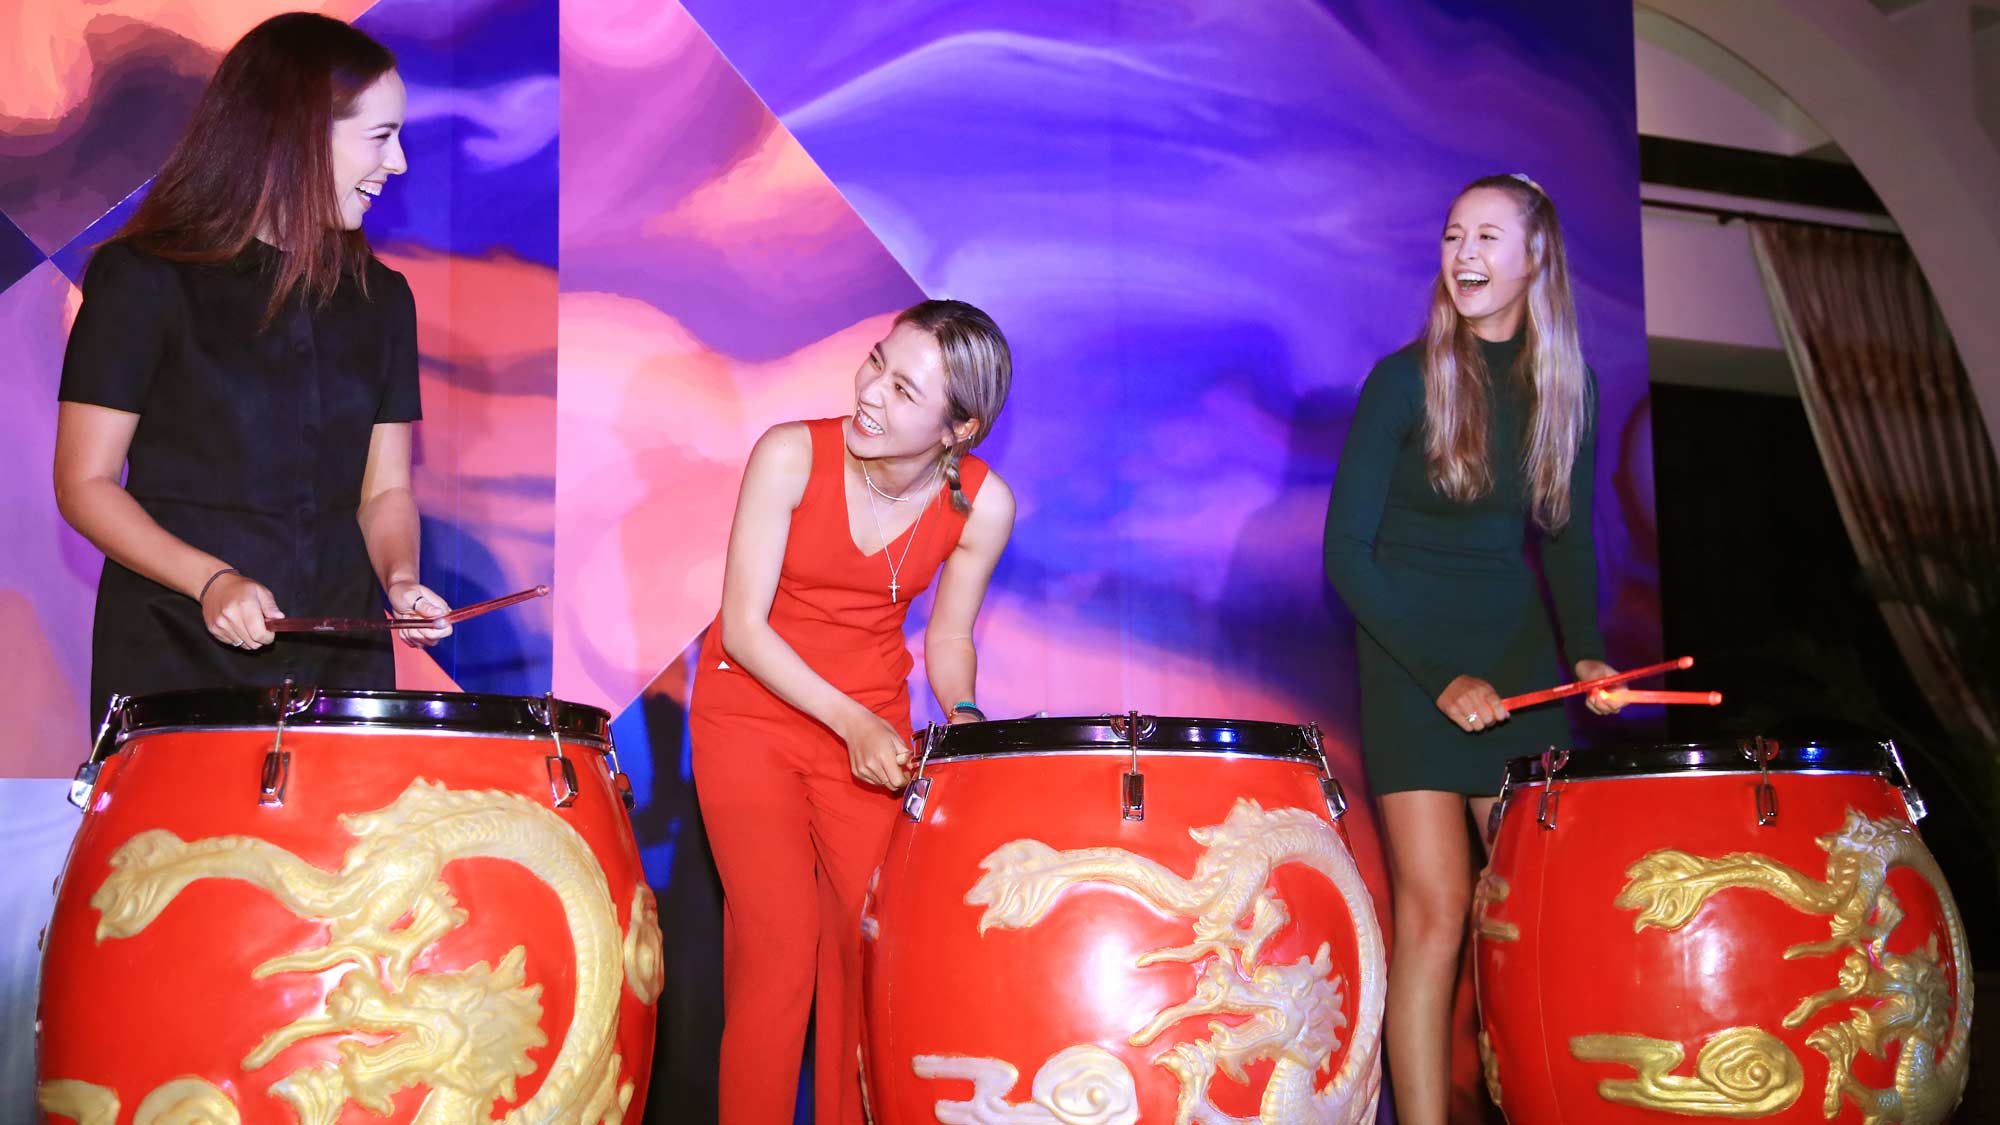 Georgia Hall of England, Lydia Ko of New Zealand and Nelly Korda of the United States attend a welcome dinner prior to the HSBC Women's World Championship at Sentosa Golf Club on February 26, 2019 in Singapore.